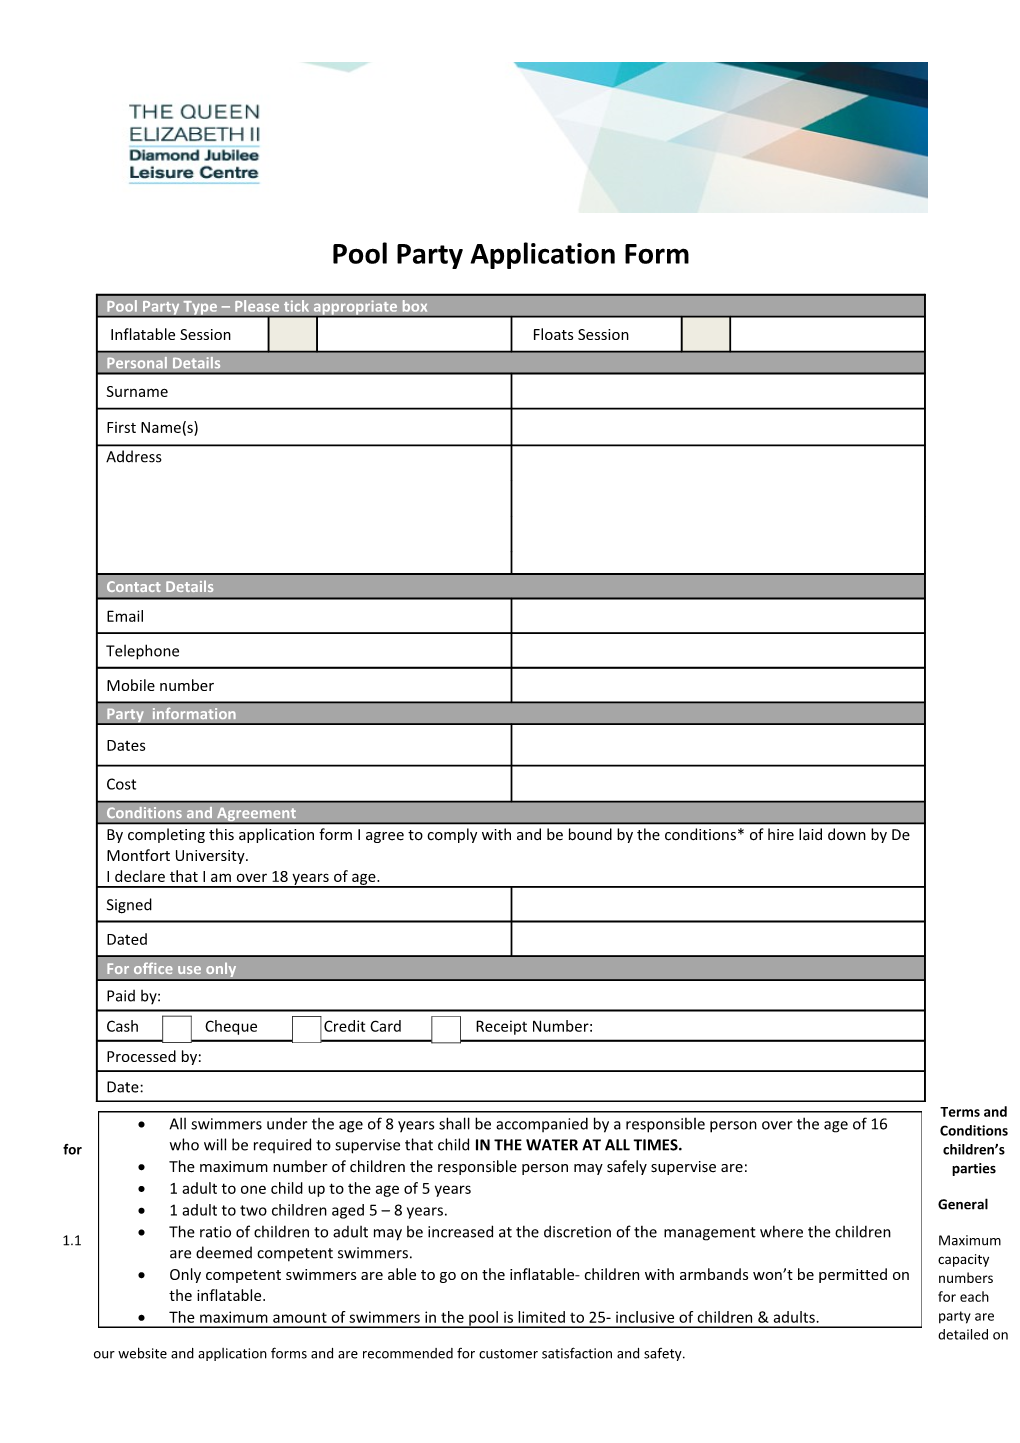 Pool Party Application Form